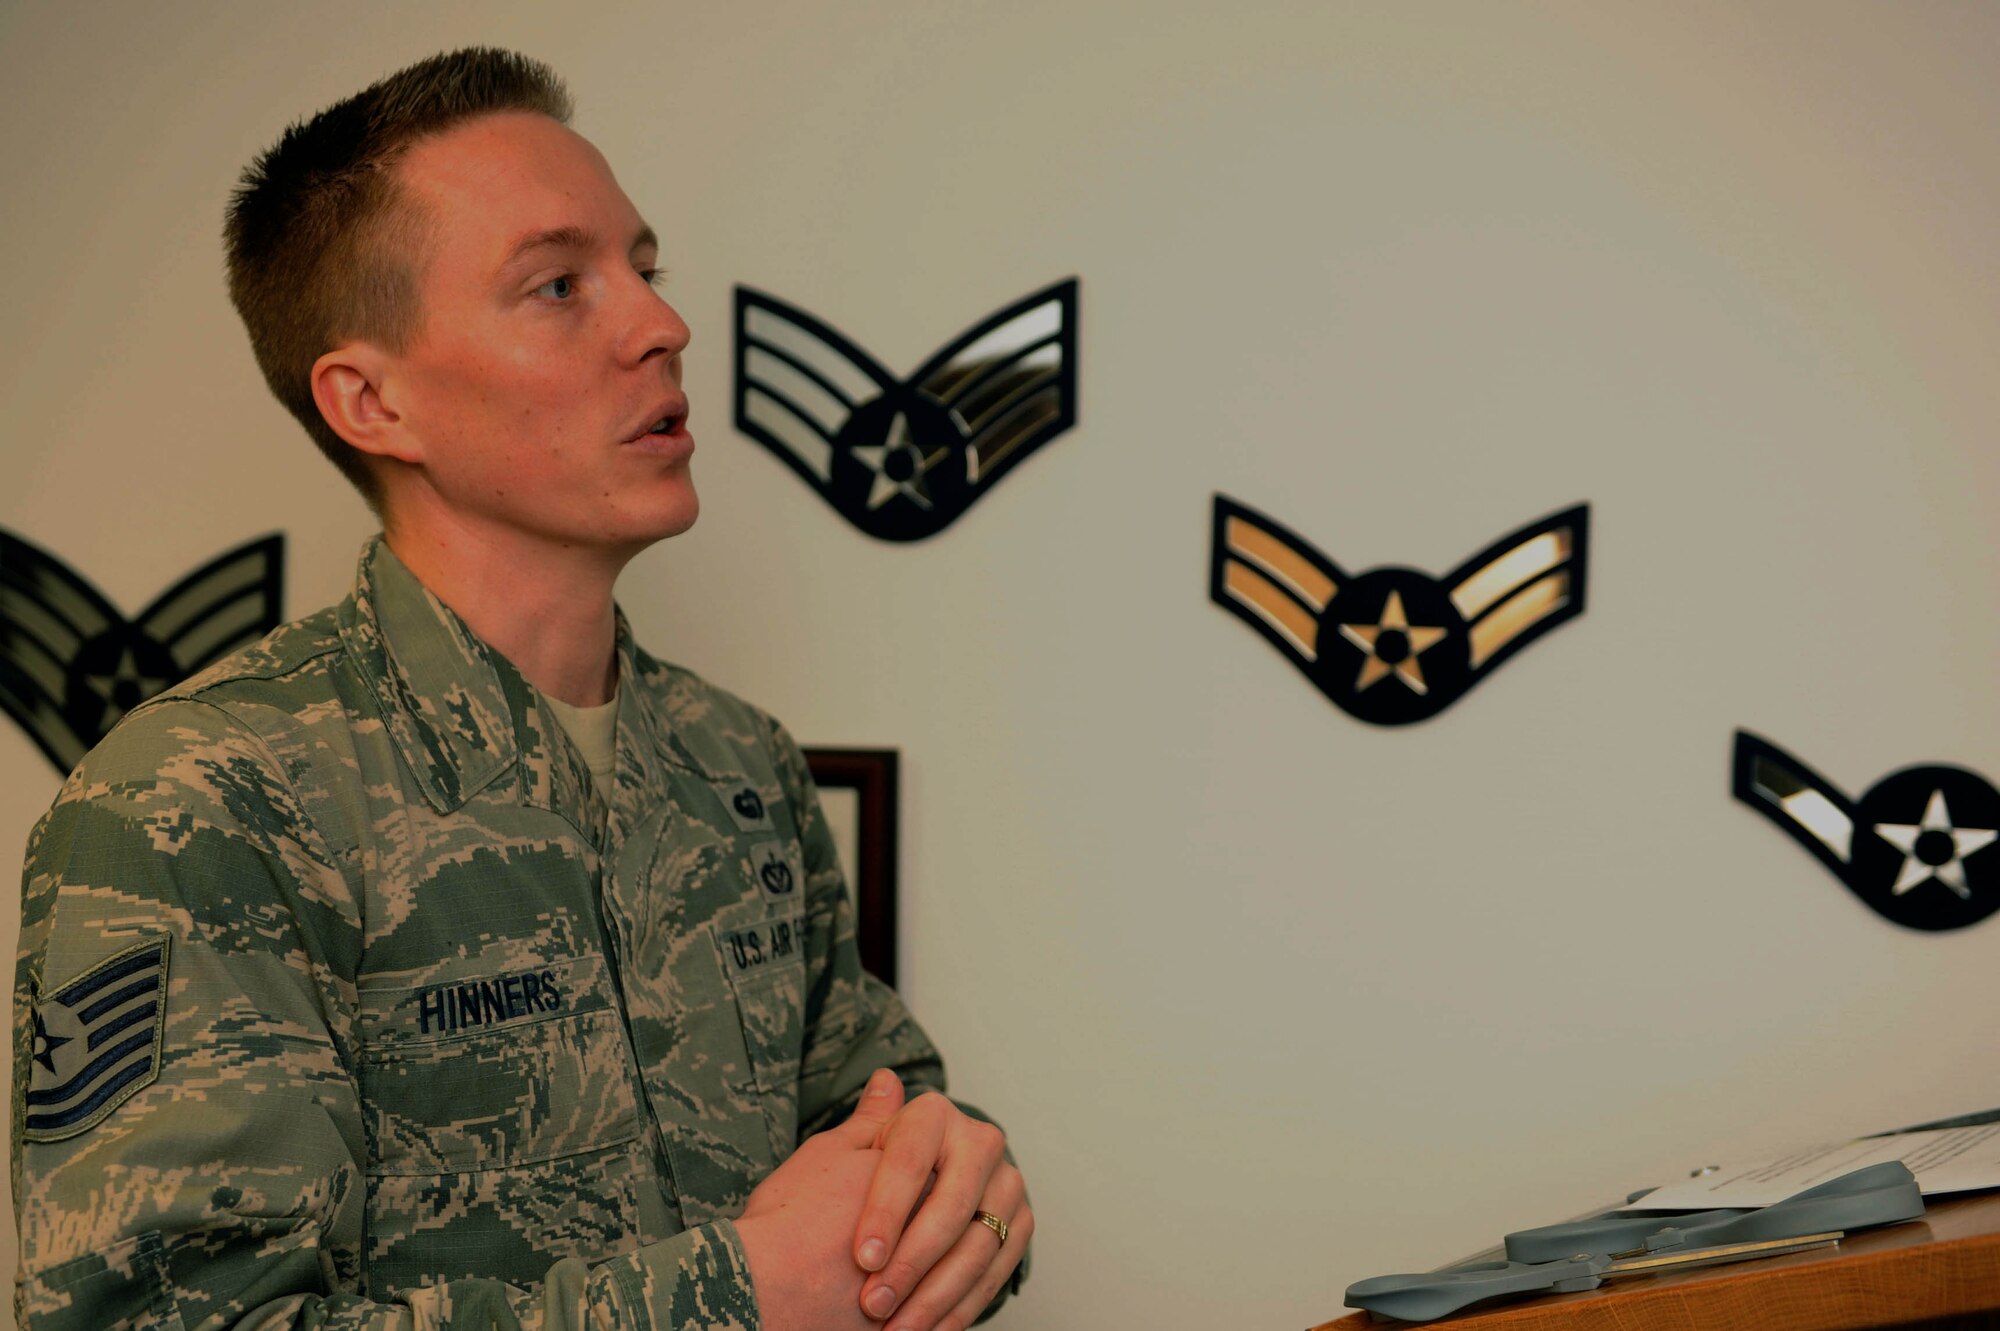 U.S. Air Force Tech. Sgt. Kalob Hinners, a Pitsenbarger Airman Leadership School instructor, gives a speech during the Pitsenbarger Heritage Room ribbon-cutting ceremony in the Pitsenbarger ALS at Spangdahlem Air Base, Germany, March 4, 2015. Hinners headed the conception, planning and construction of the heritage room with the aid of ALS staff and students. (U.S. Air Force photo by Airman 1st Class Timothy Kim/Released)